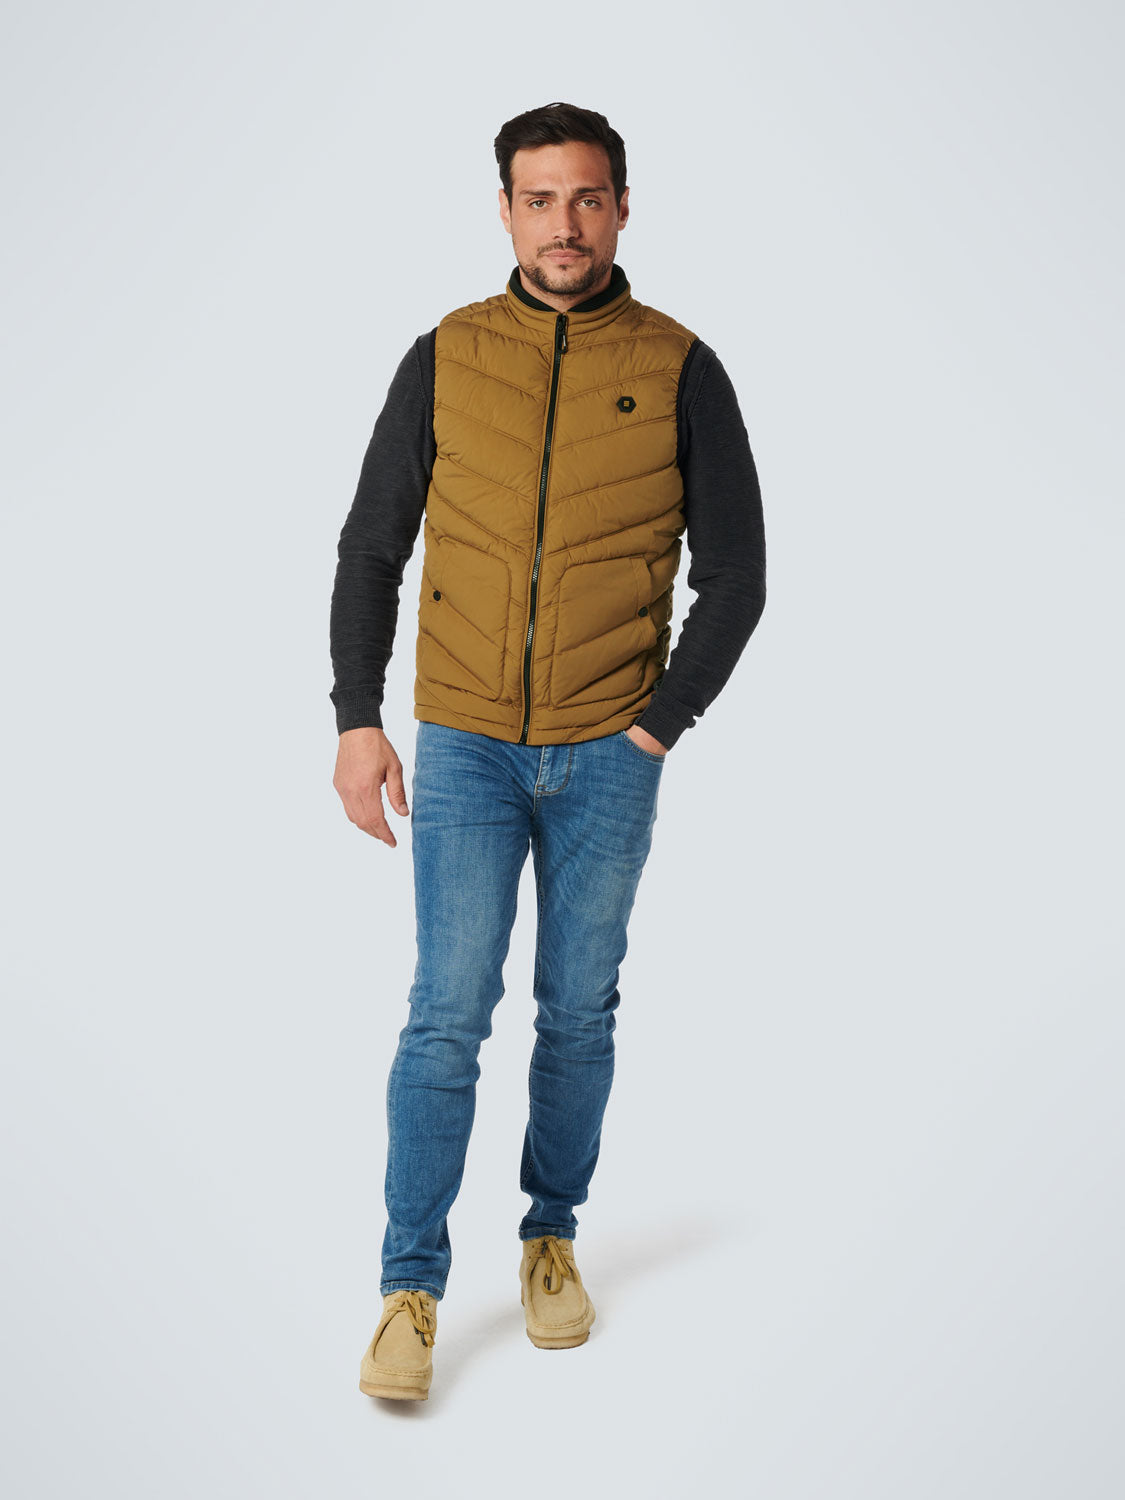 No Excess - Padded Bodywarmer - Moss or Green